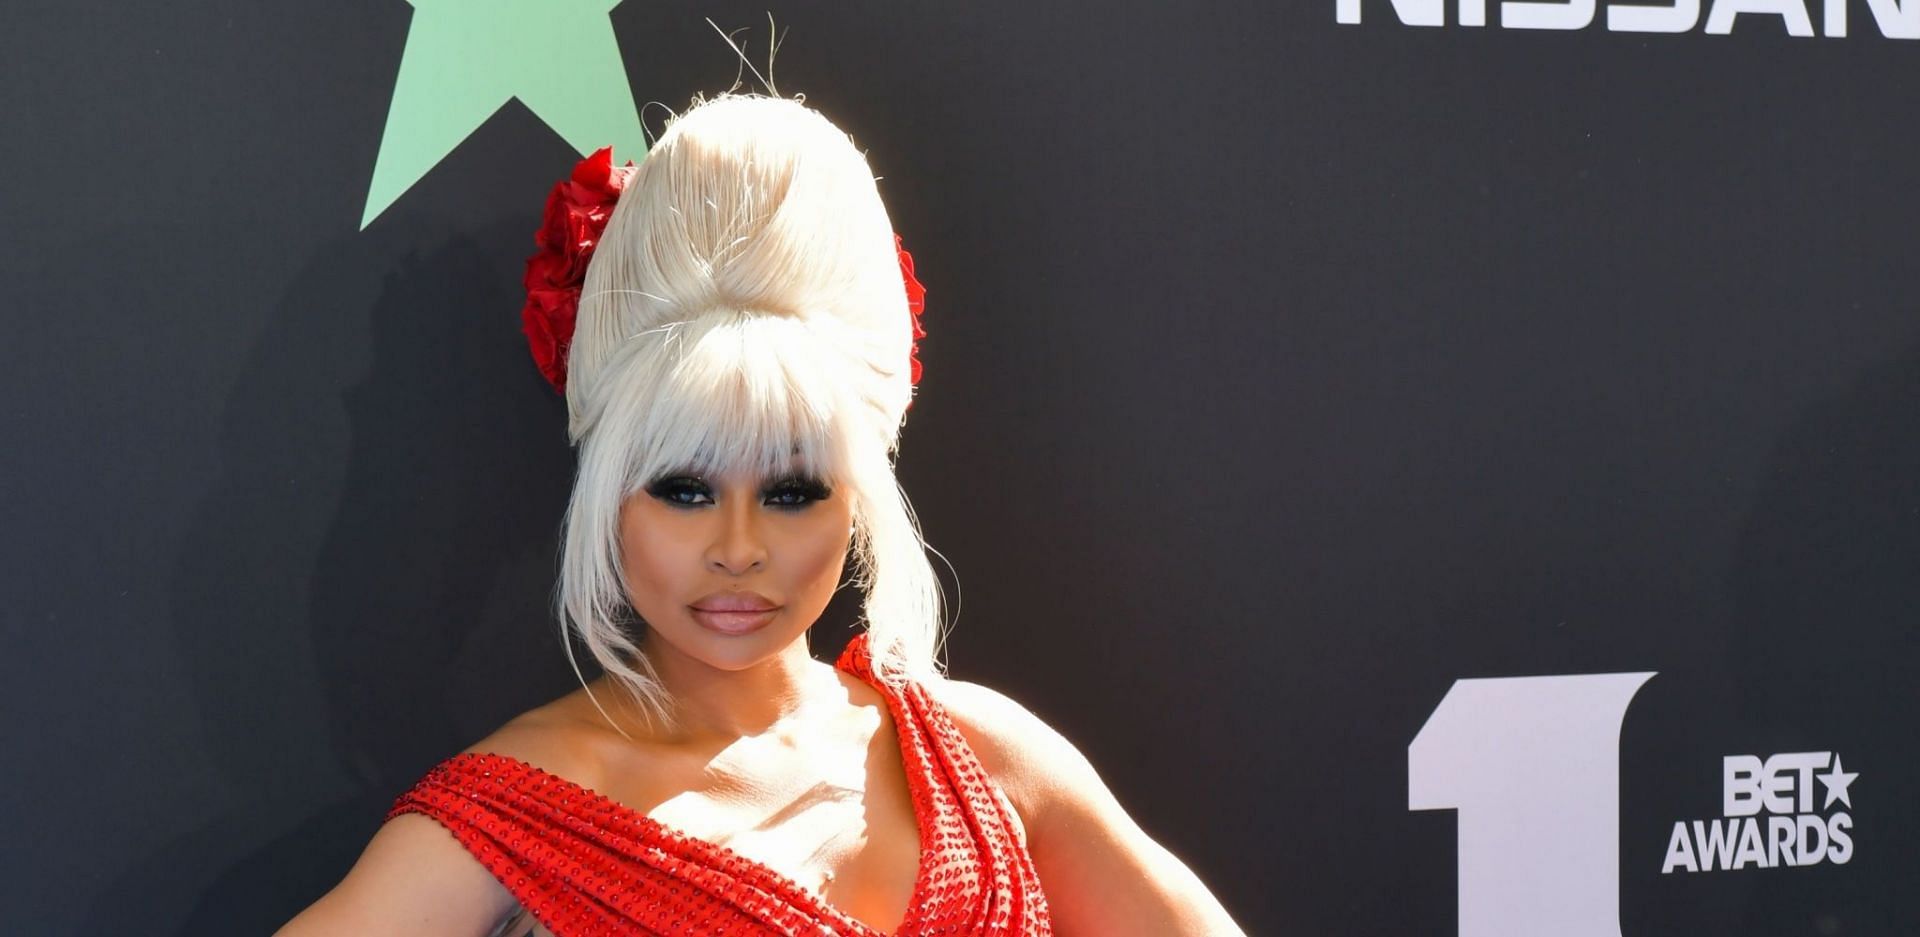 Blac Chyna has been allegedly accused of holding a woman captive in her California hotel room (Image via Rodin Eckenroth/WireImage)